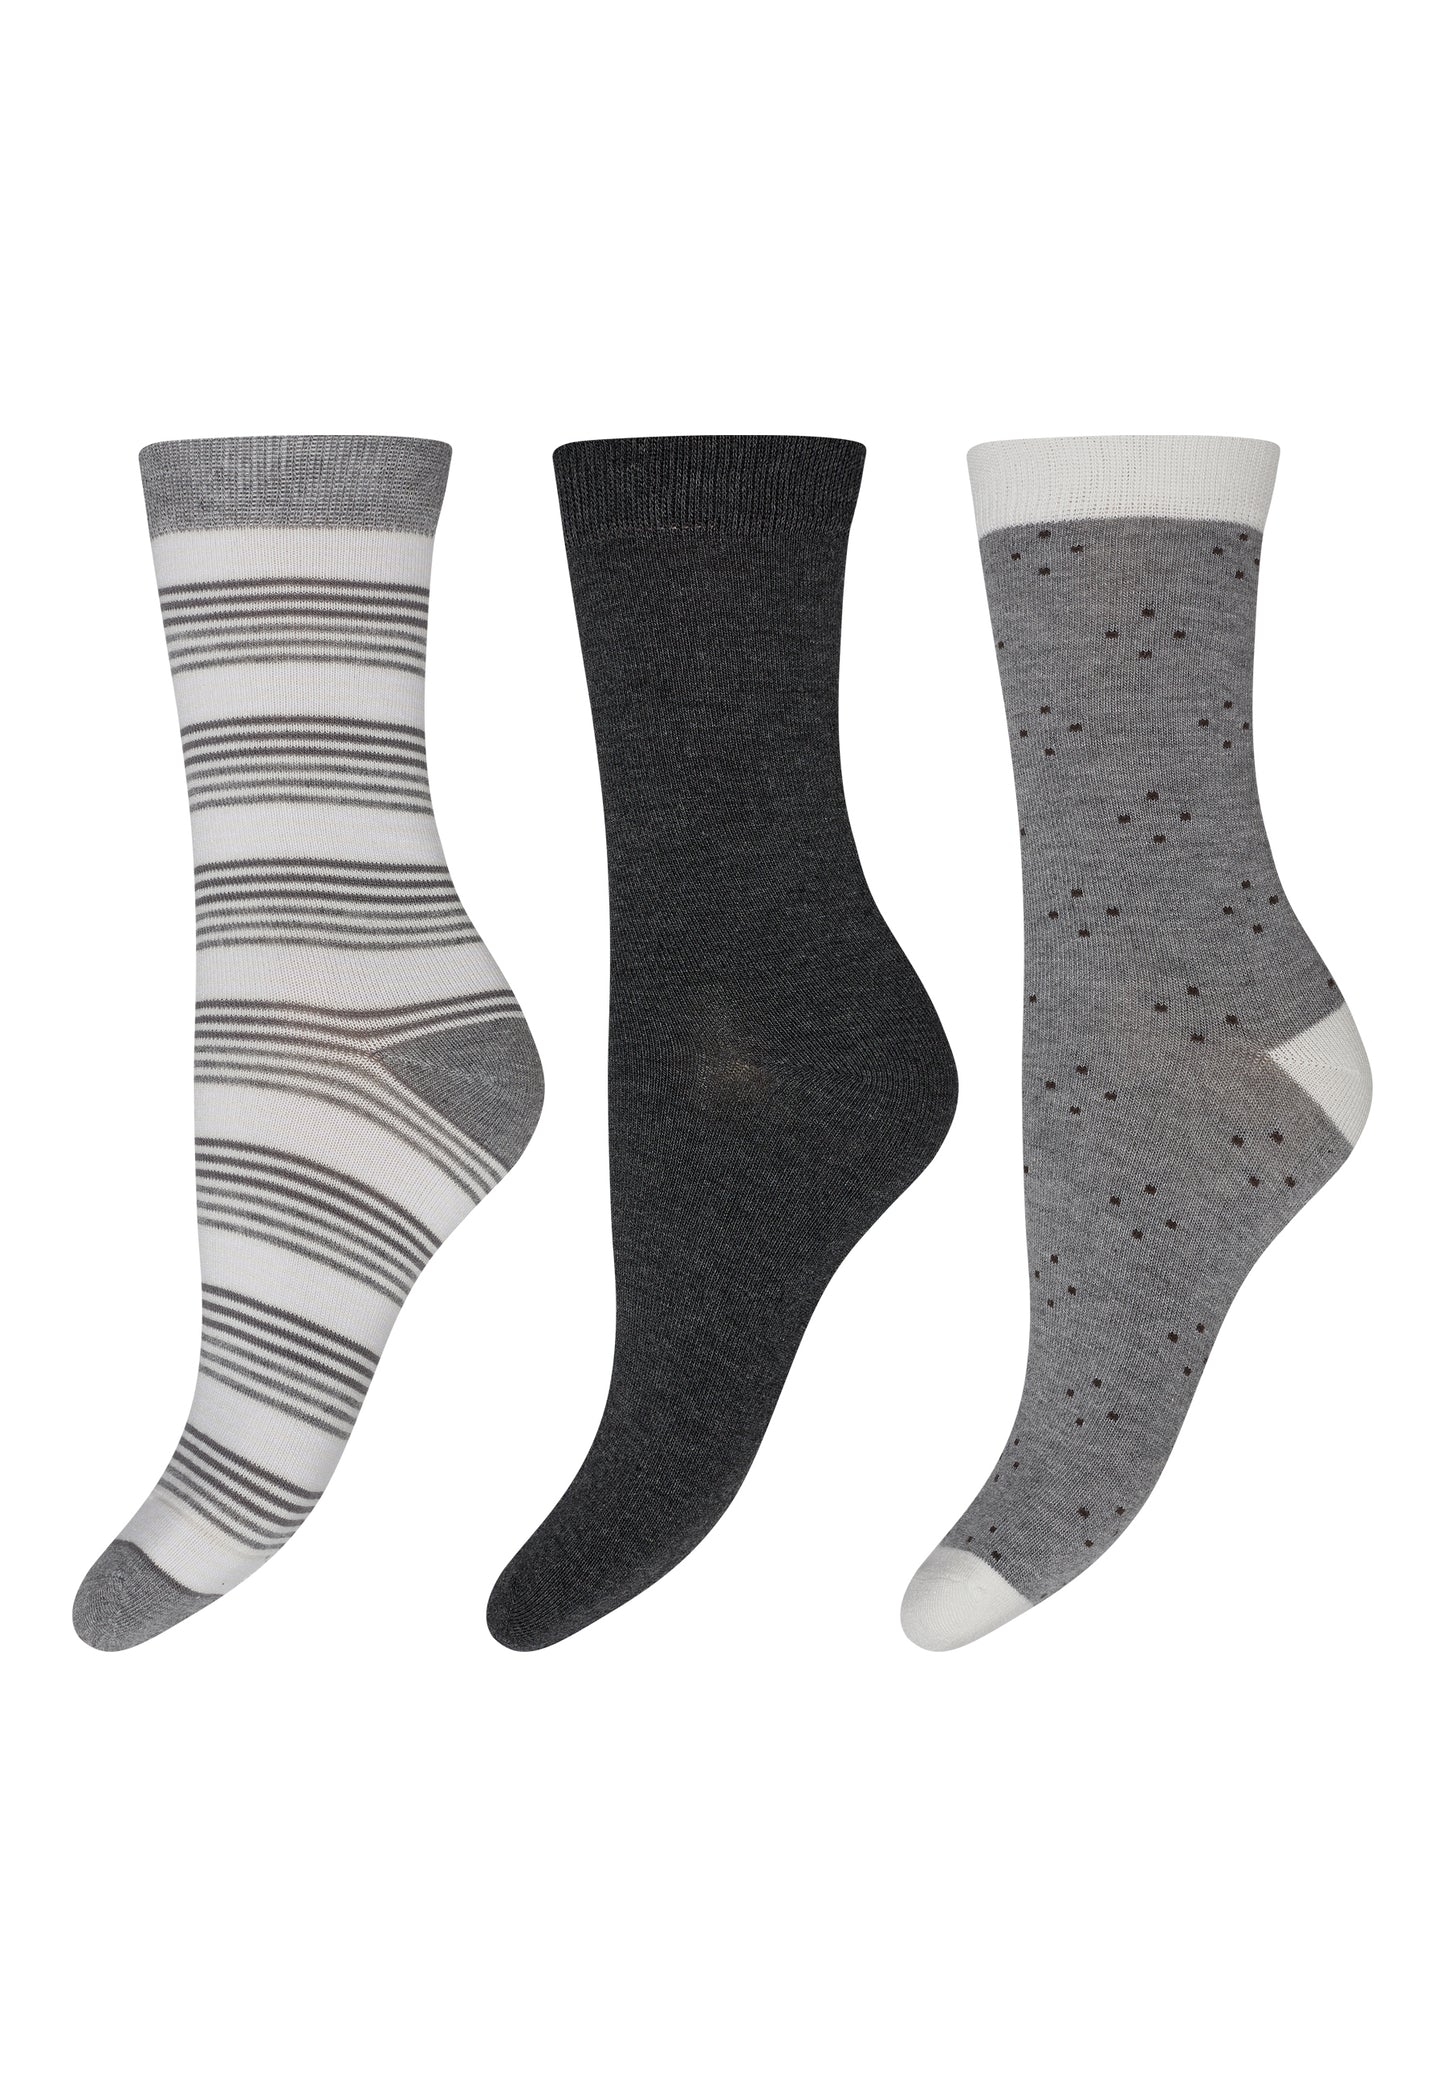 Decoy - Ankle 3-pack Gray patterned